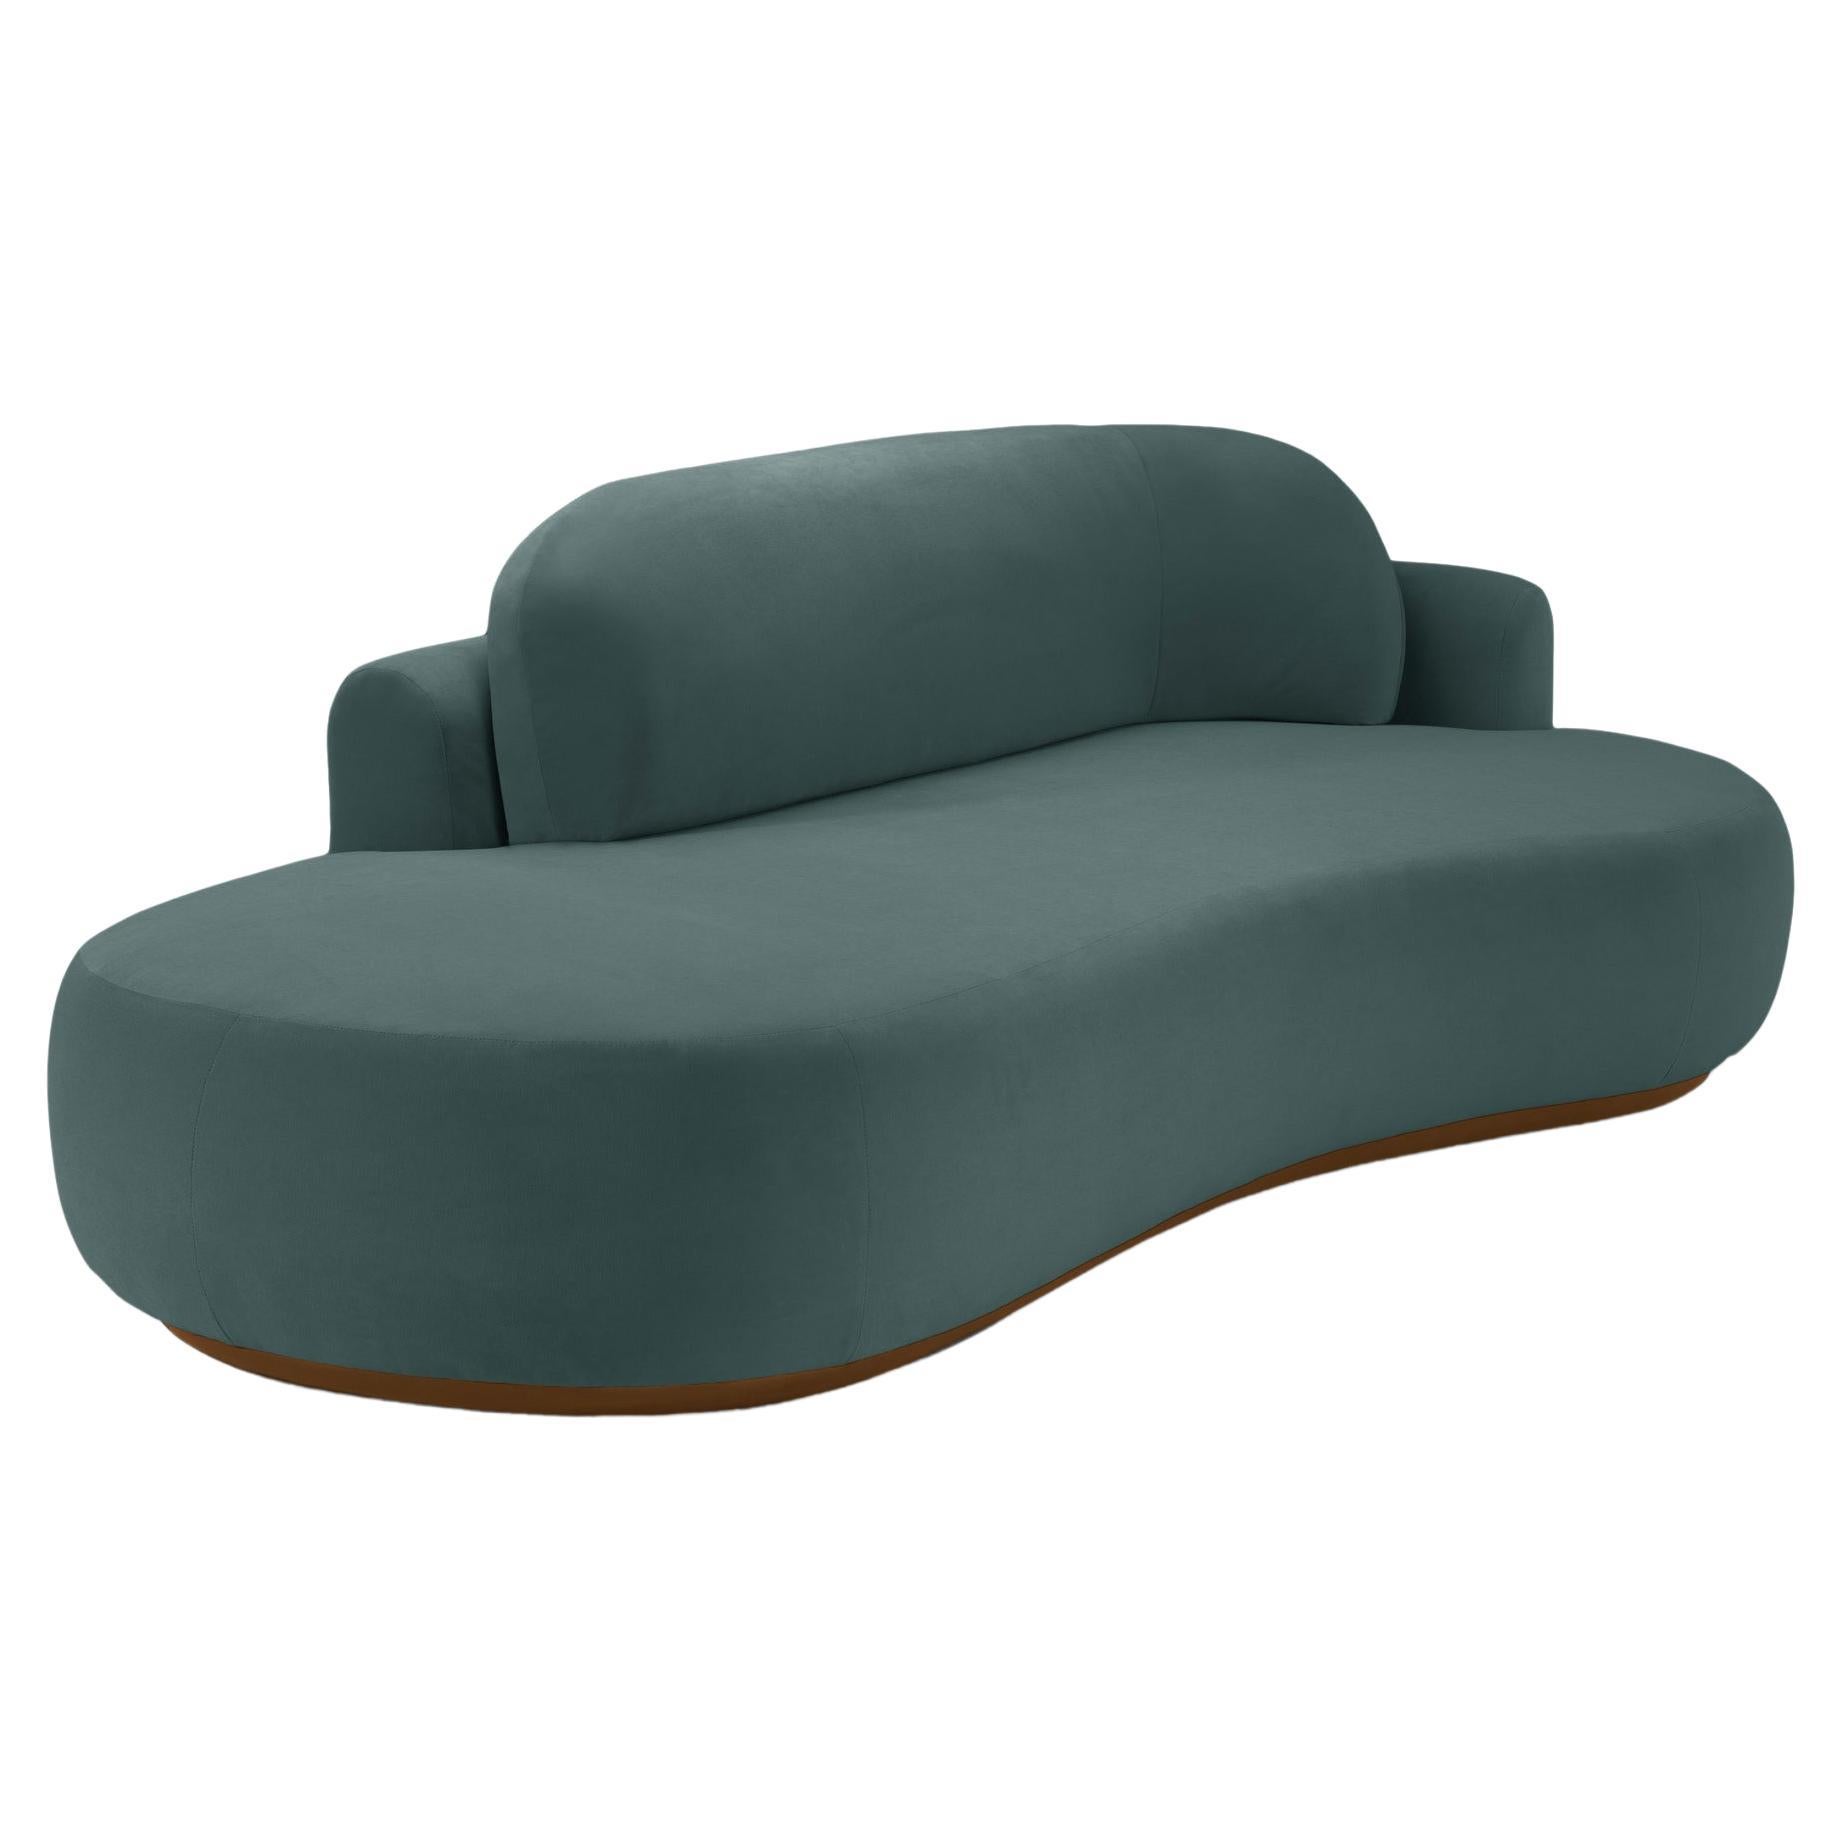 Naked Sofa Single with Beech Ash-056-1 and Teal For Sale